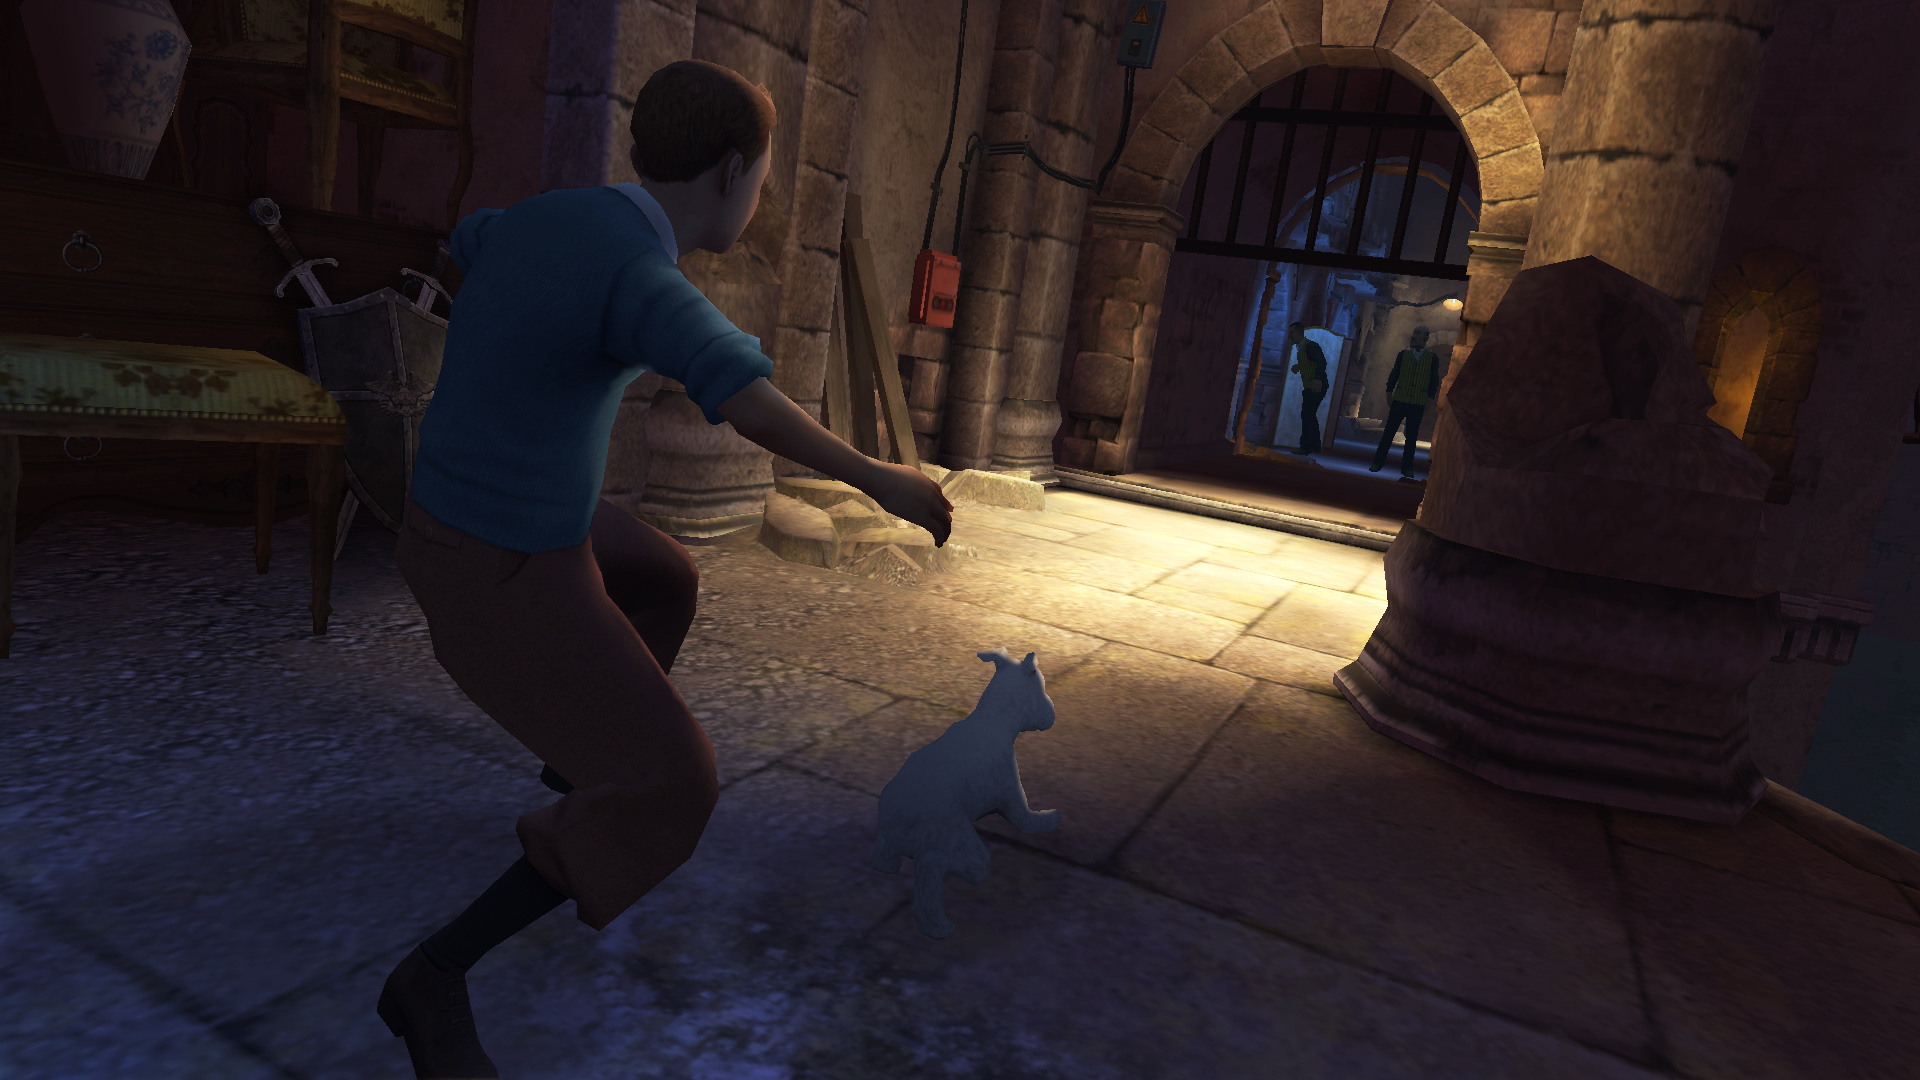 The Adventures of Tintin: The Secret of the Unicorn - The Game - screenshot 6